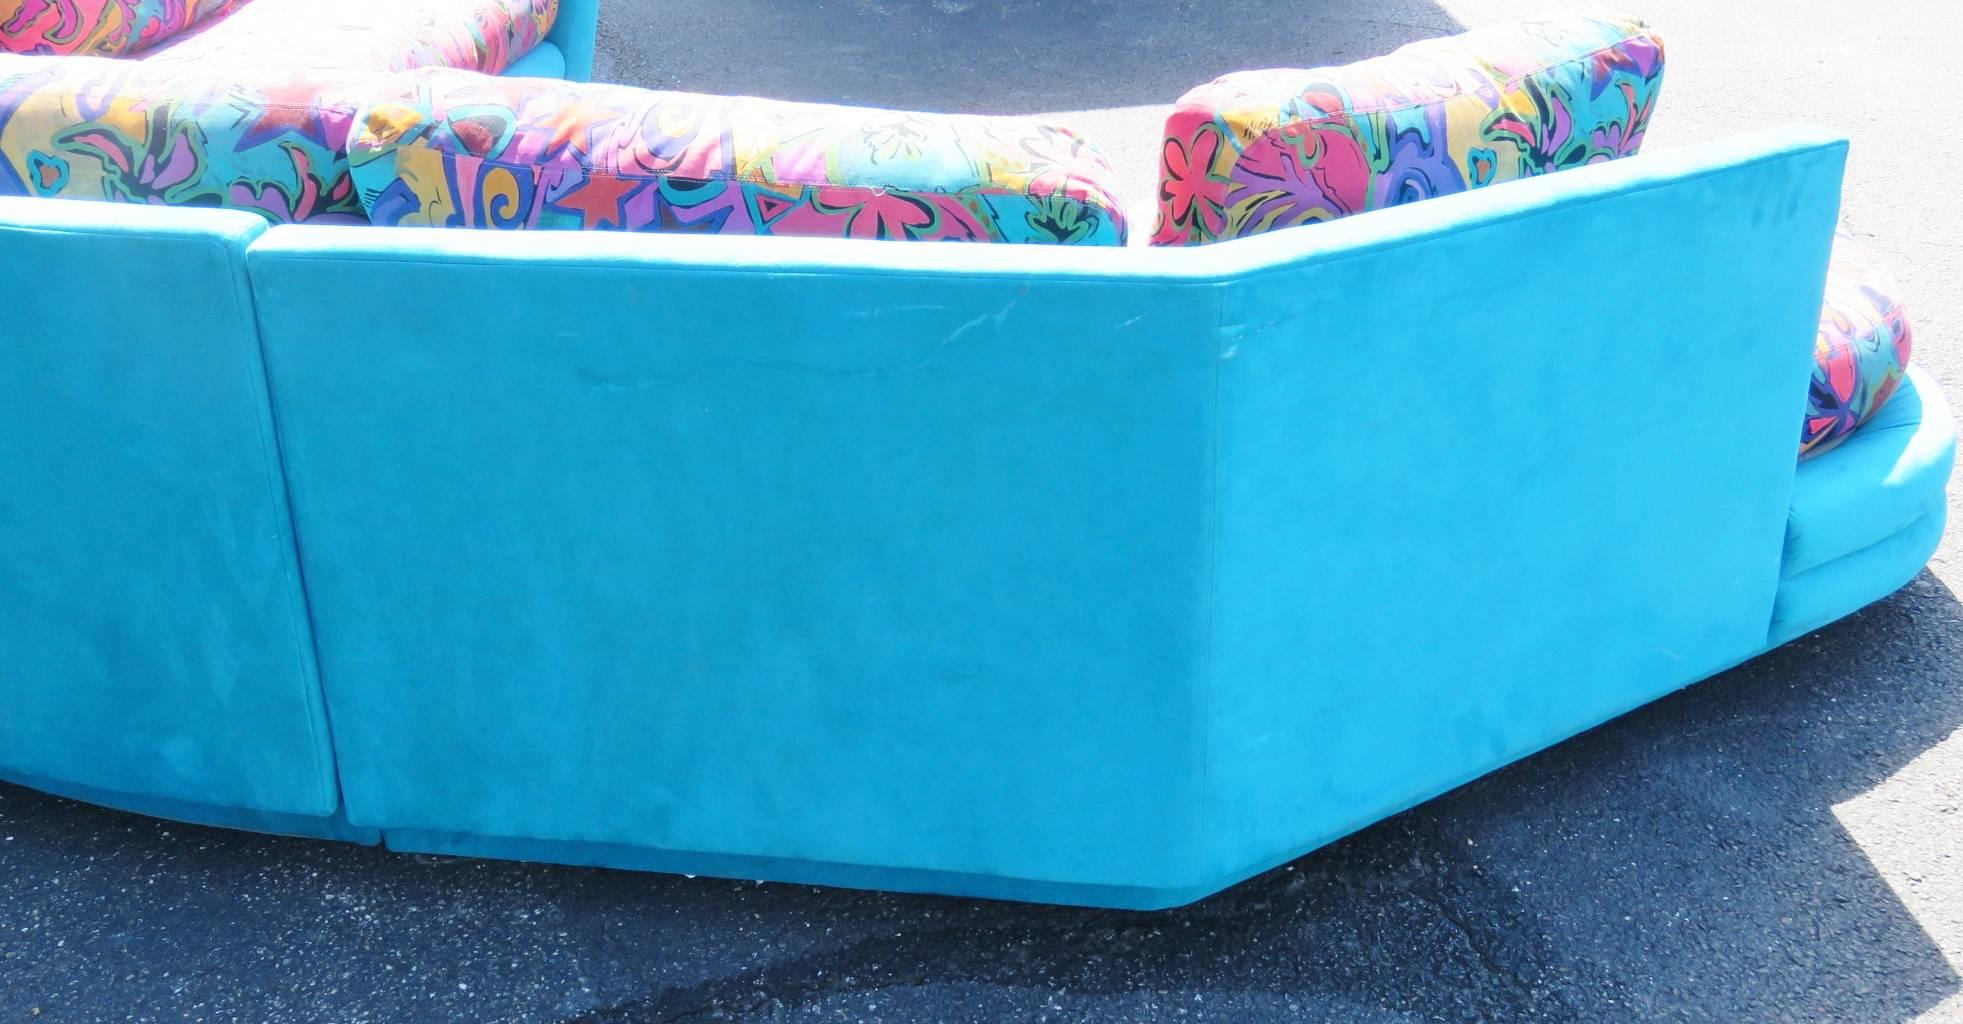 Turquoise microfiber frame. Modern decorative cushions. Directional tag.